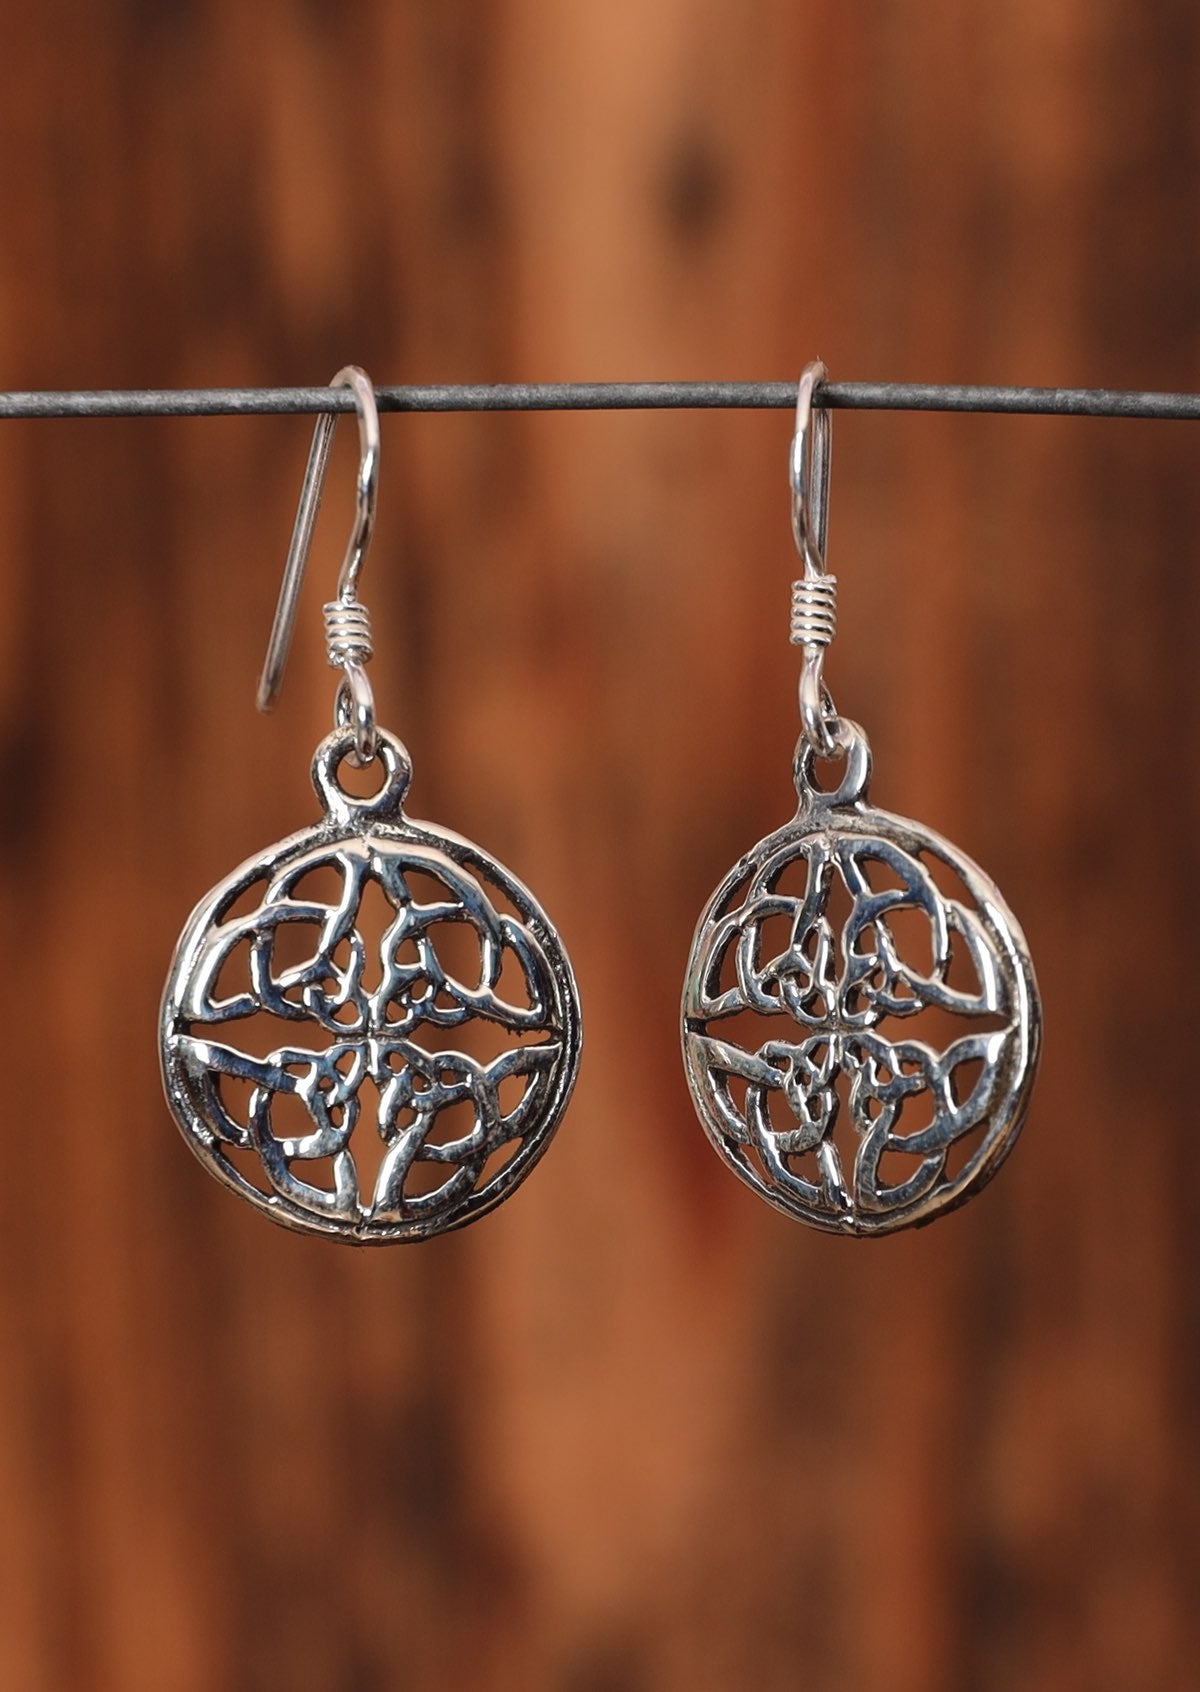 92.5% silver Celtic style woven medallion earrings sit on a wire for display.